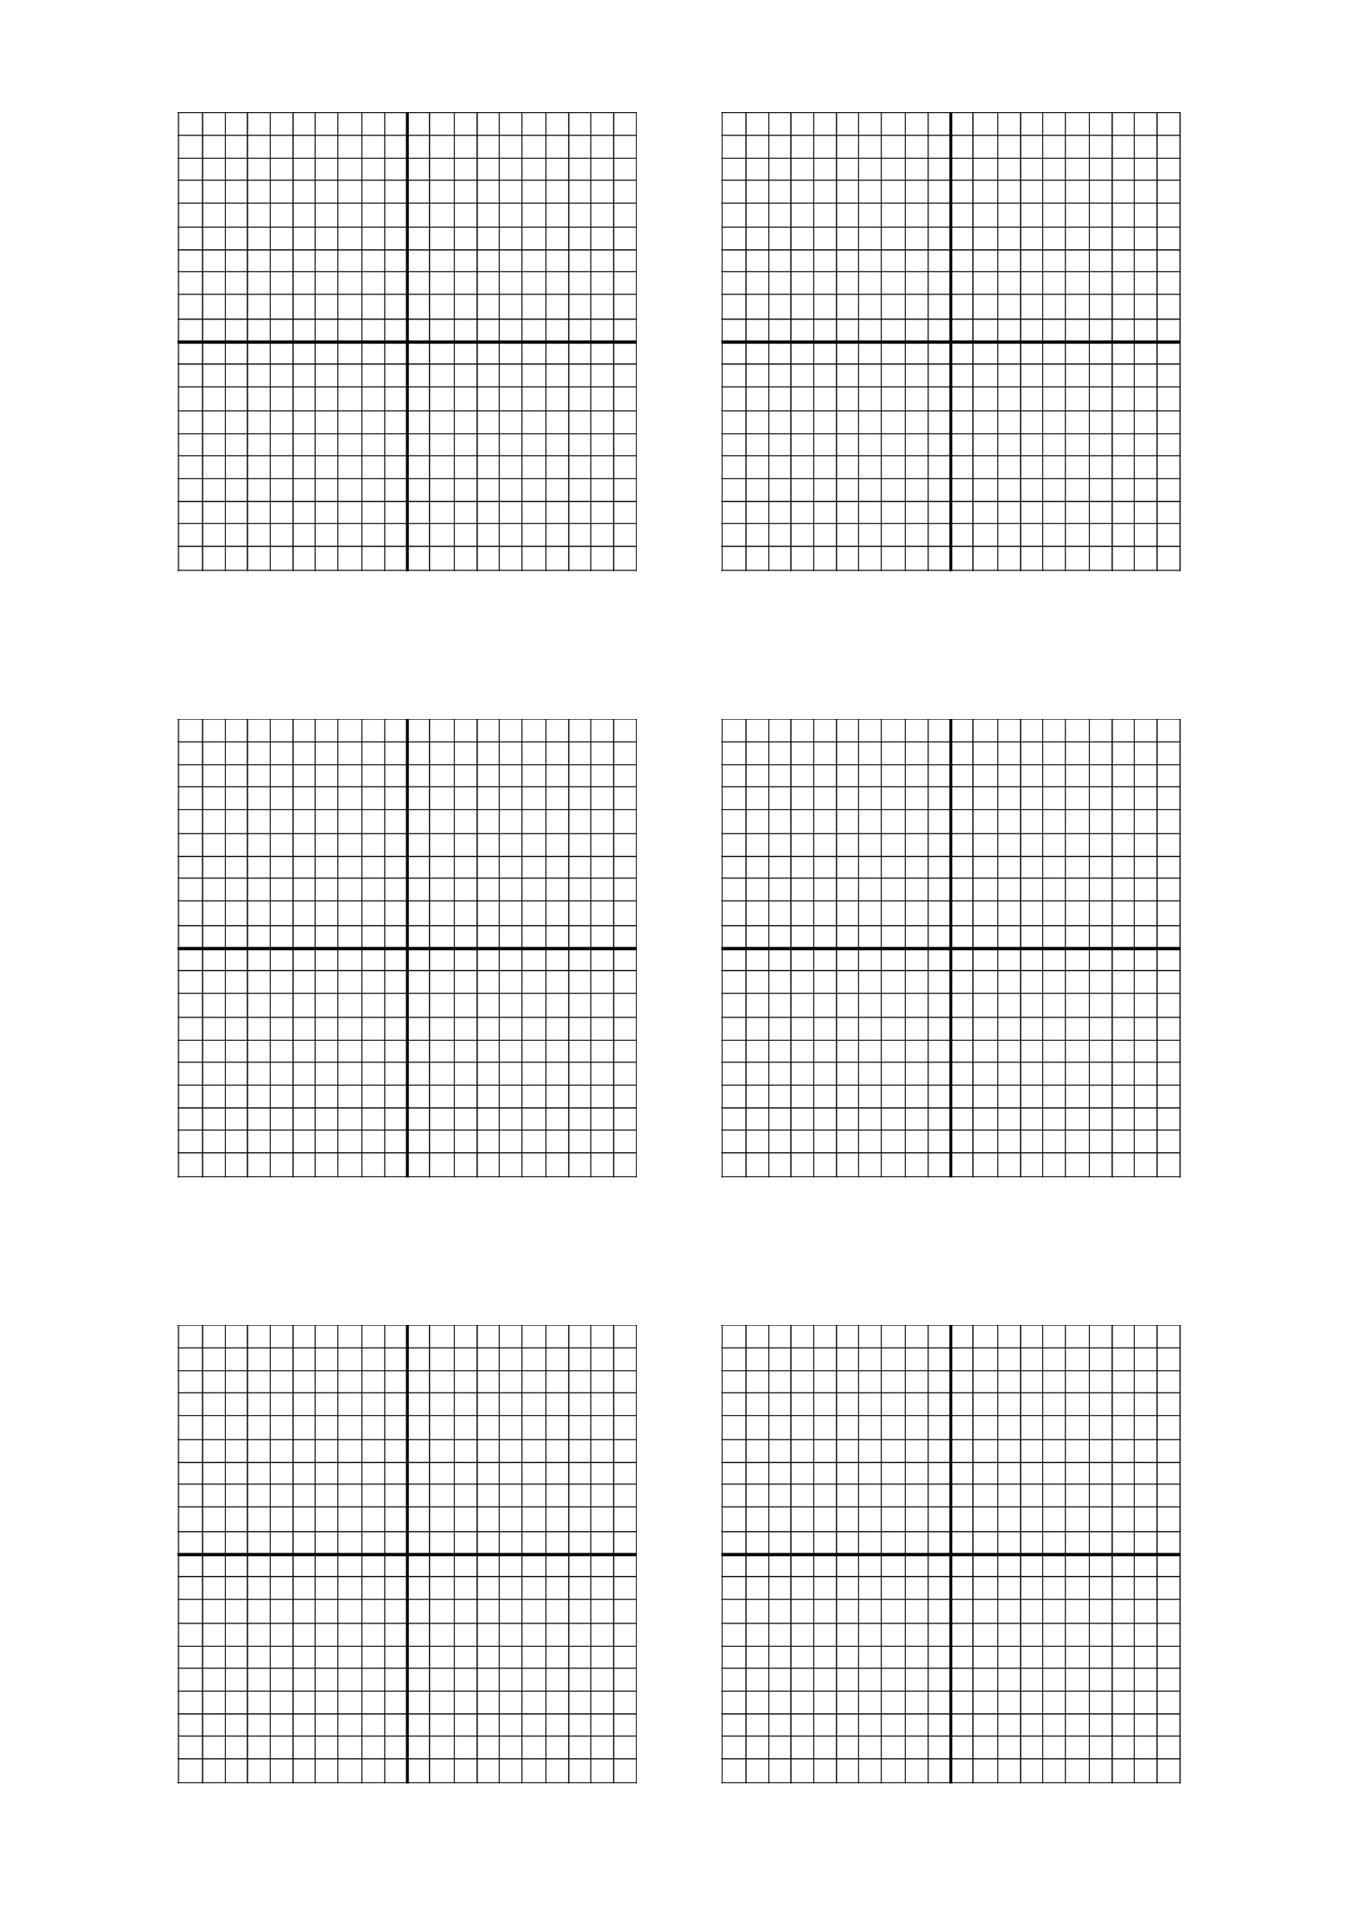 8 Best Images of Blank Coordinate Plane Worksheets  Printable Coordinate Graph Paper 